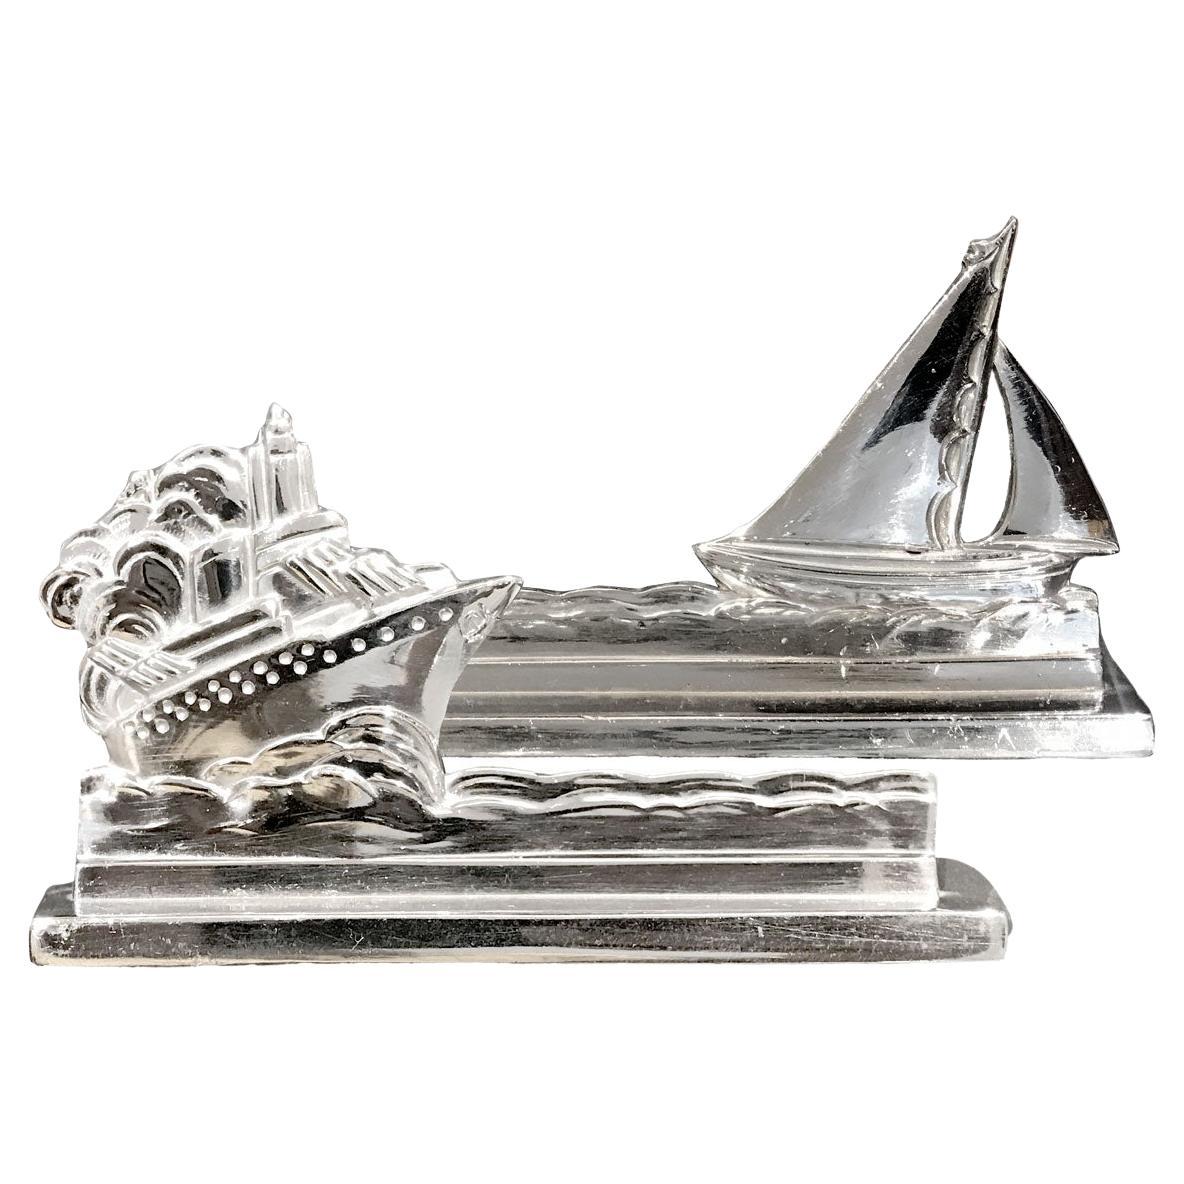 Art Deco set of 12 different boat-shaped and ship-shaped knife holders are chromium-plated. 
The set is composed of 6 pairs of several types of boats such as a ship, a liner, a cruise ship, different sailboats etc. perfect to create an original